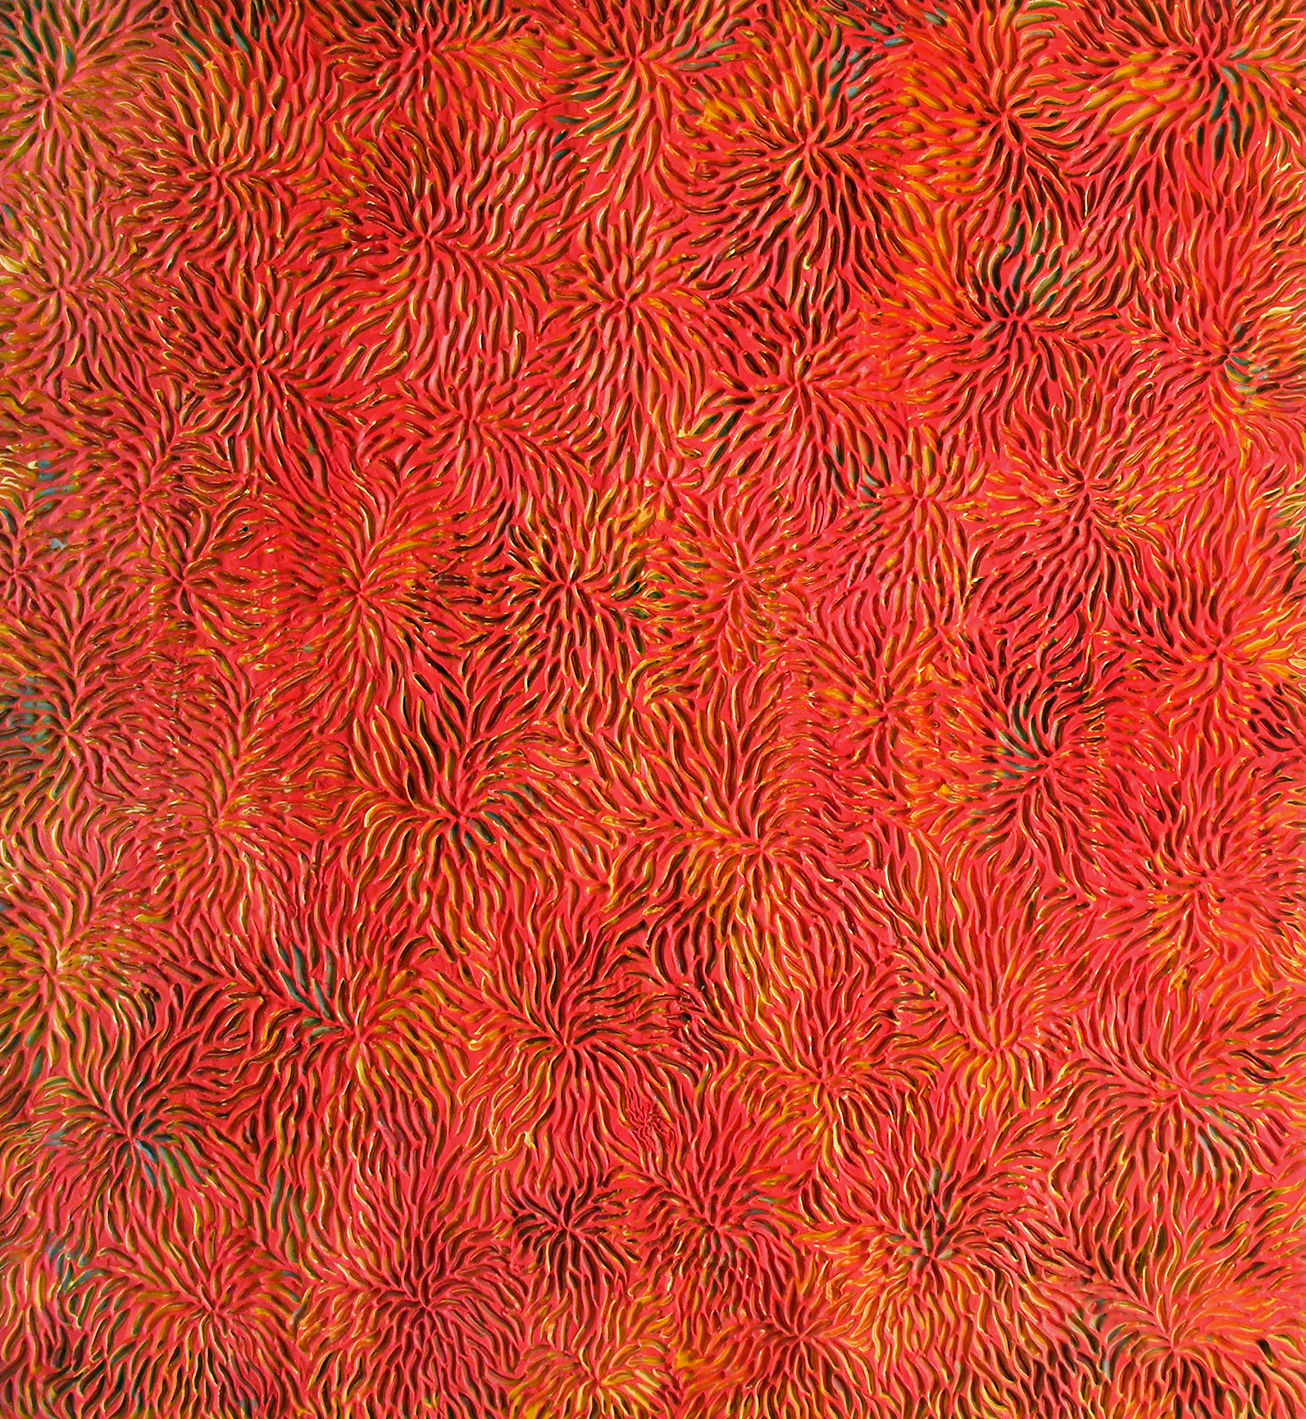 Love and Anger, 2000, encaustic on panel, 66 x 60 inches